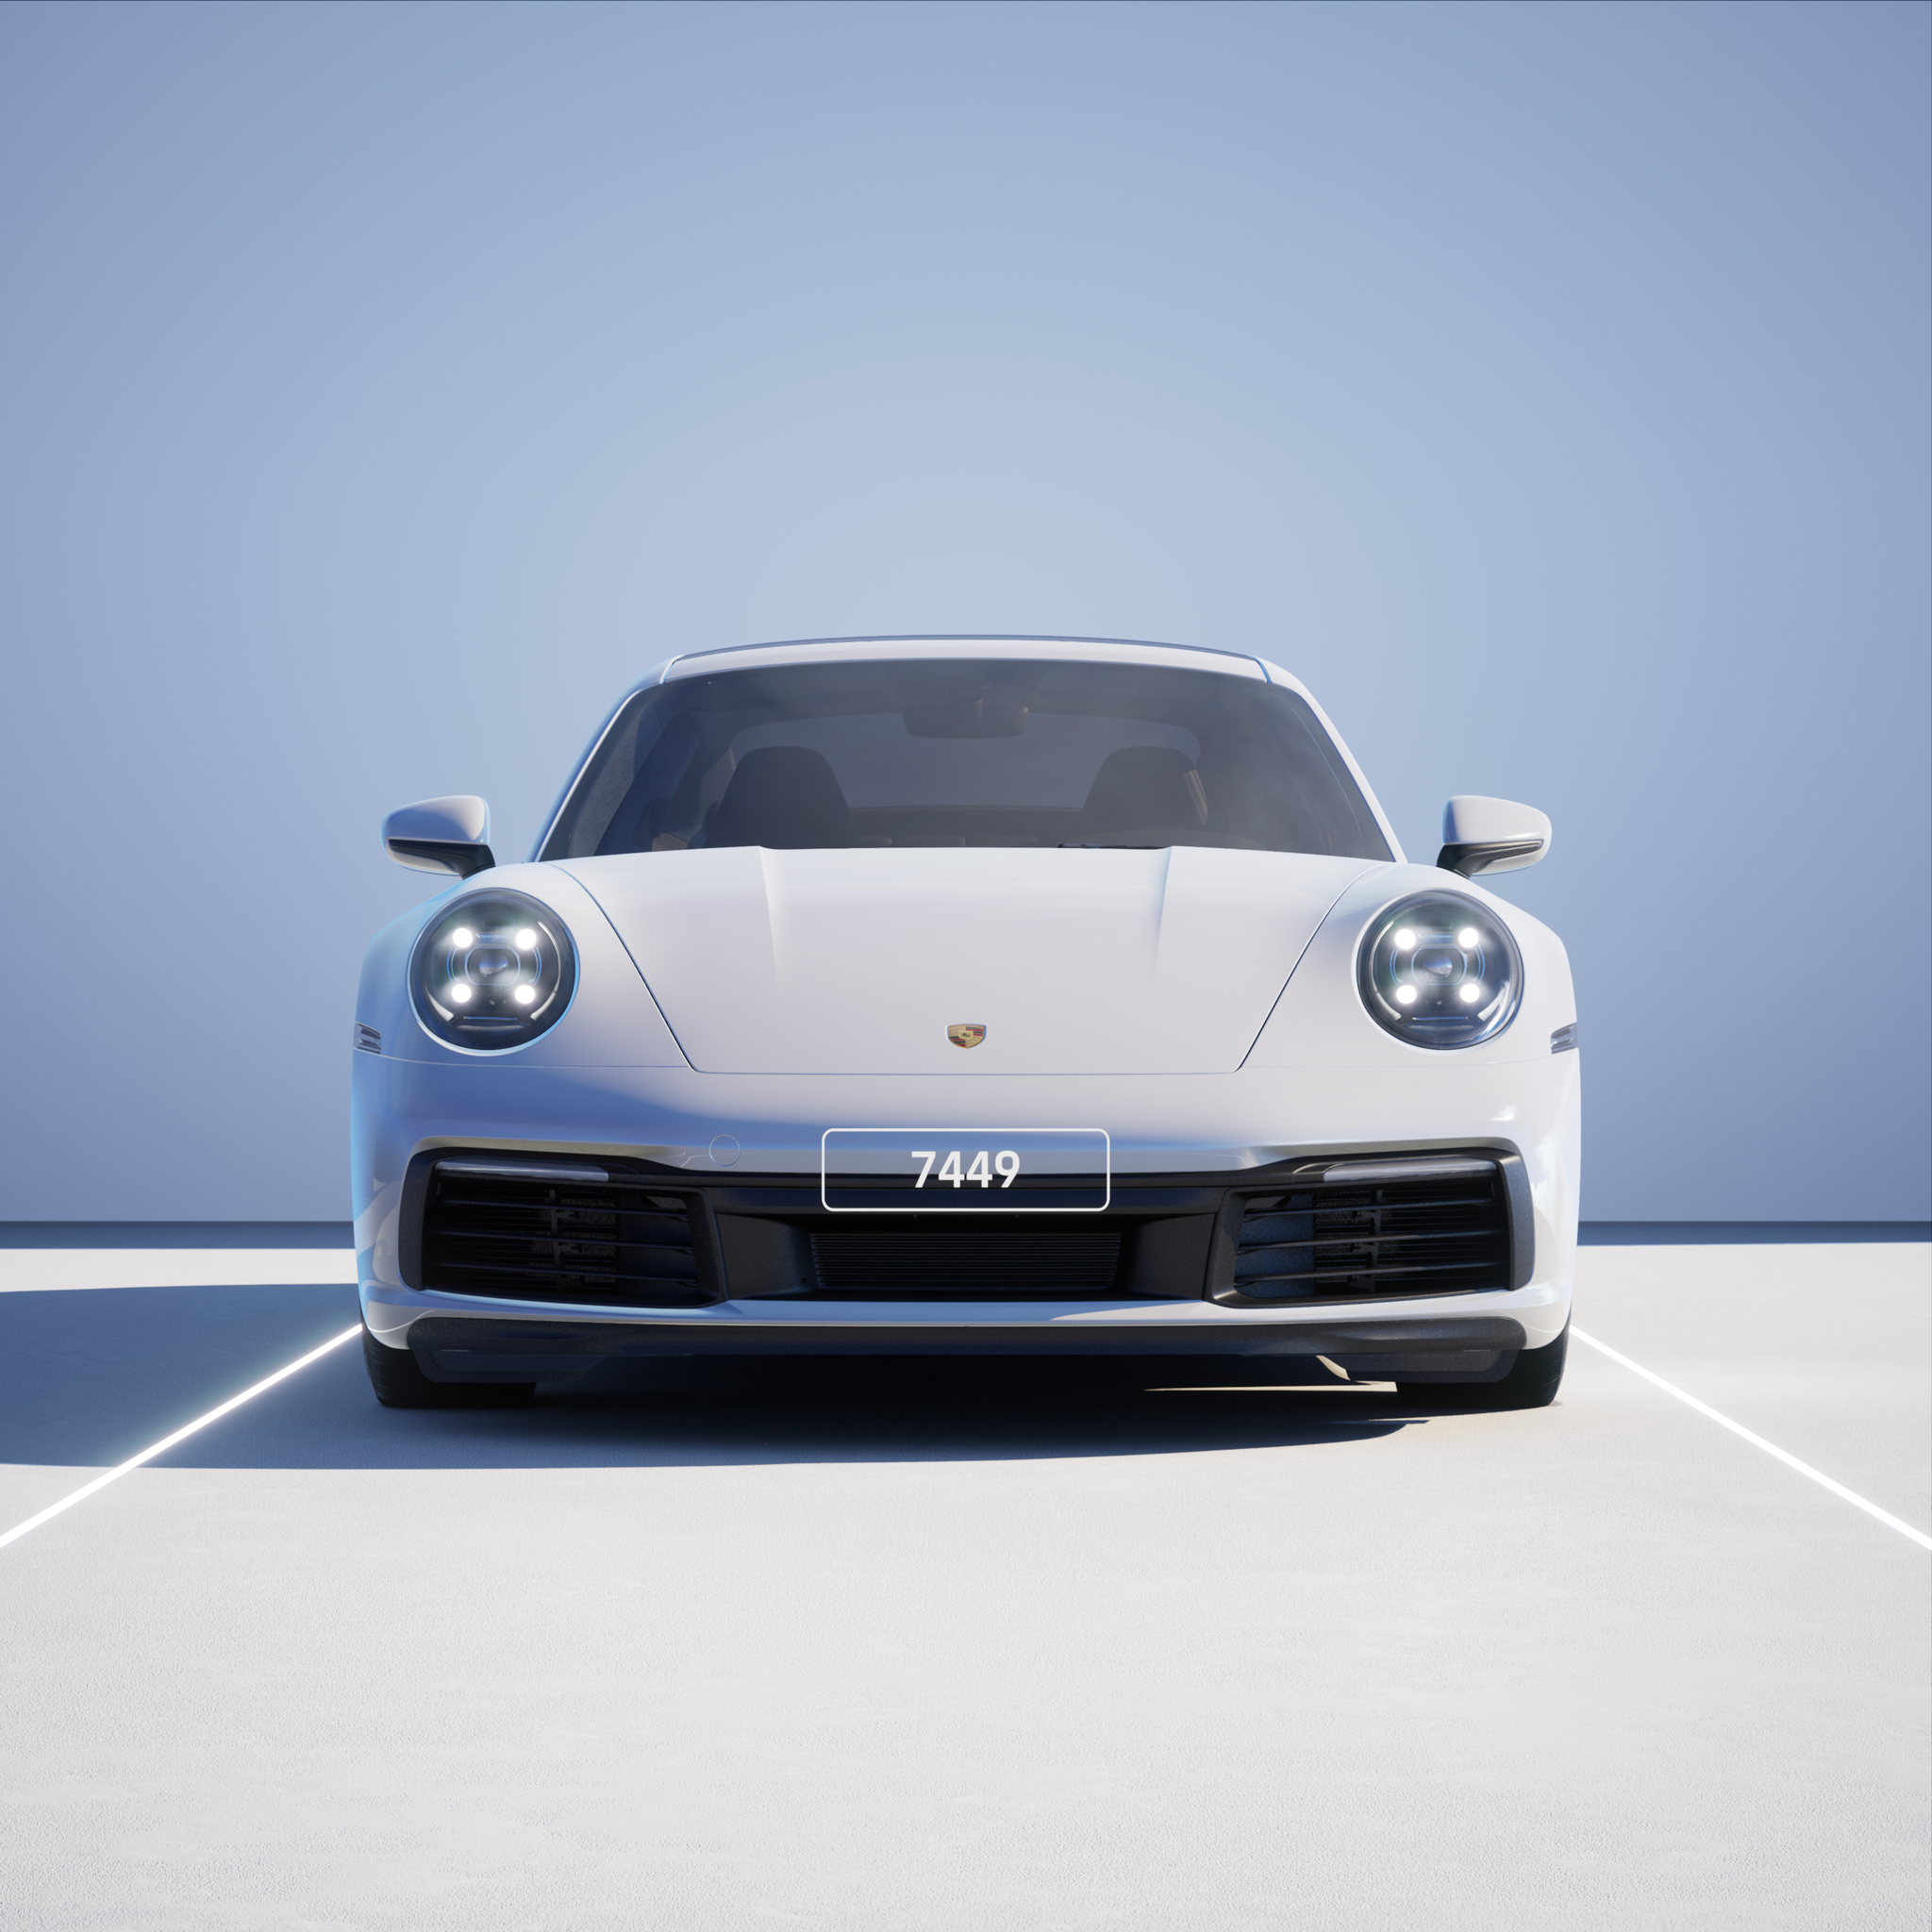 The PORSCHΞ 911 7449 image in phase